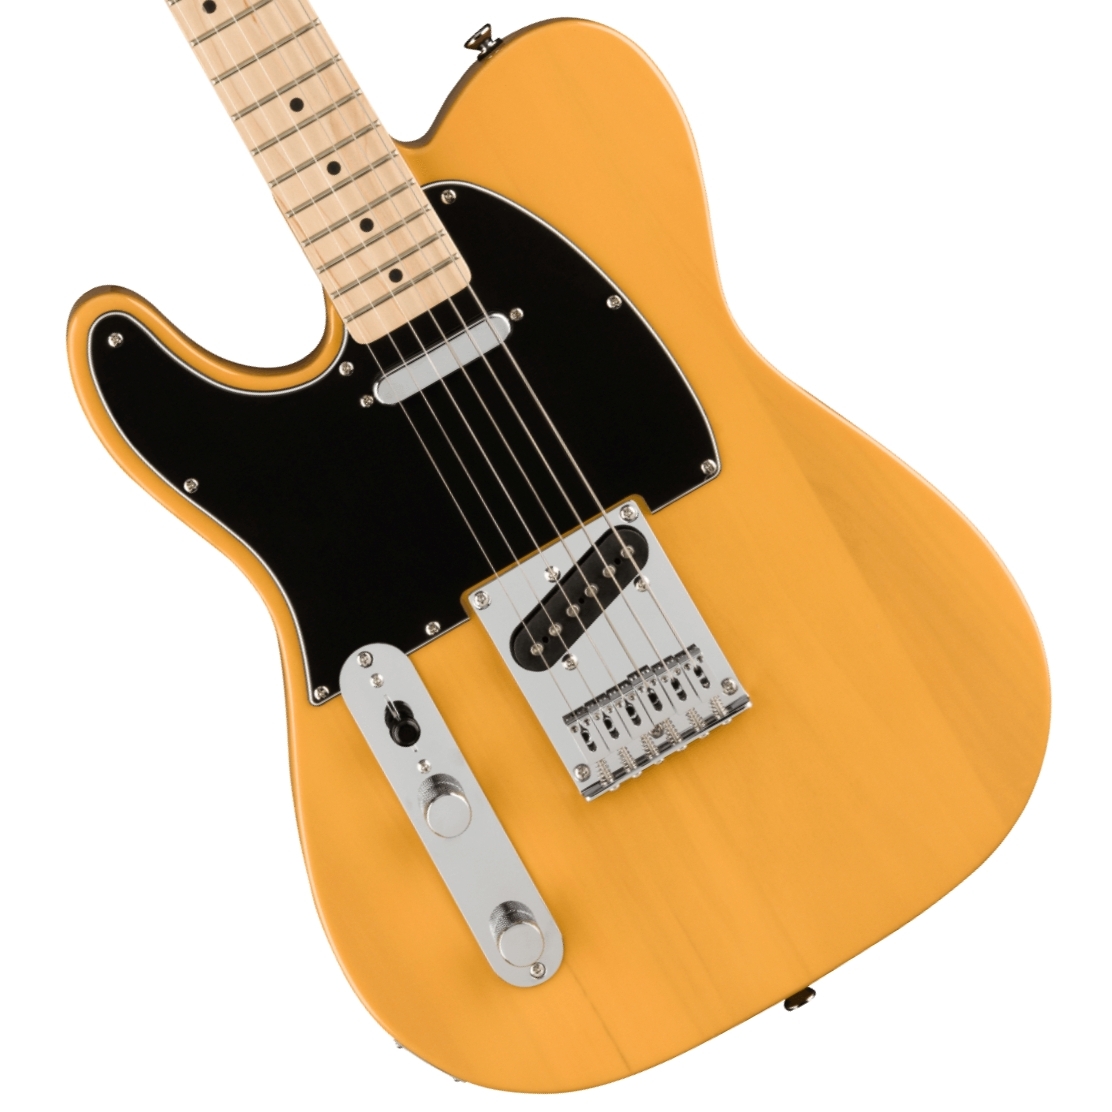 Butterscotch　Fingerboard　Blonde　Fender　Pickguard　Maple　Left-Handed　エレキギター　by　Series　Affinity　Black　イシバシ楽器　Squier　Telecaster